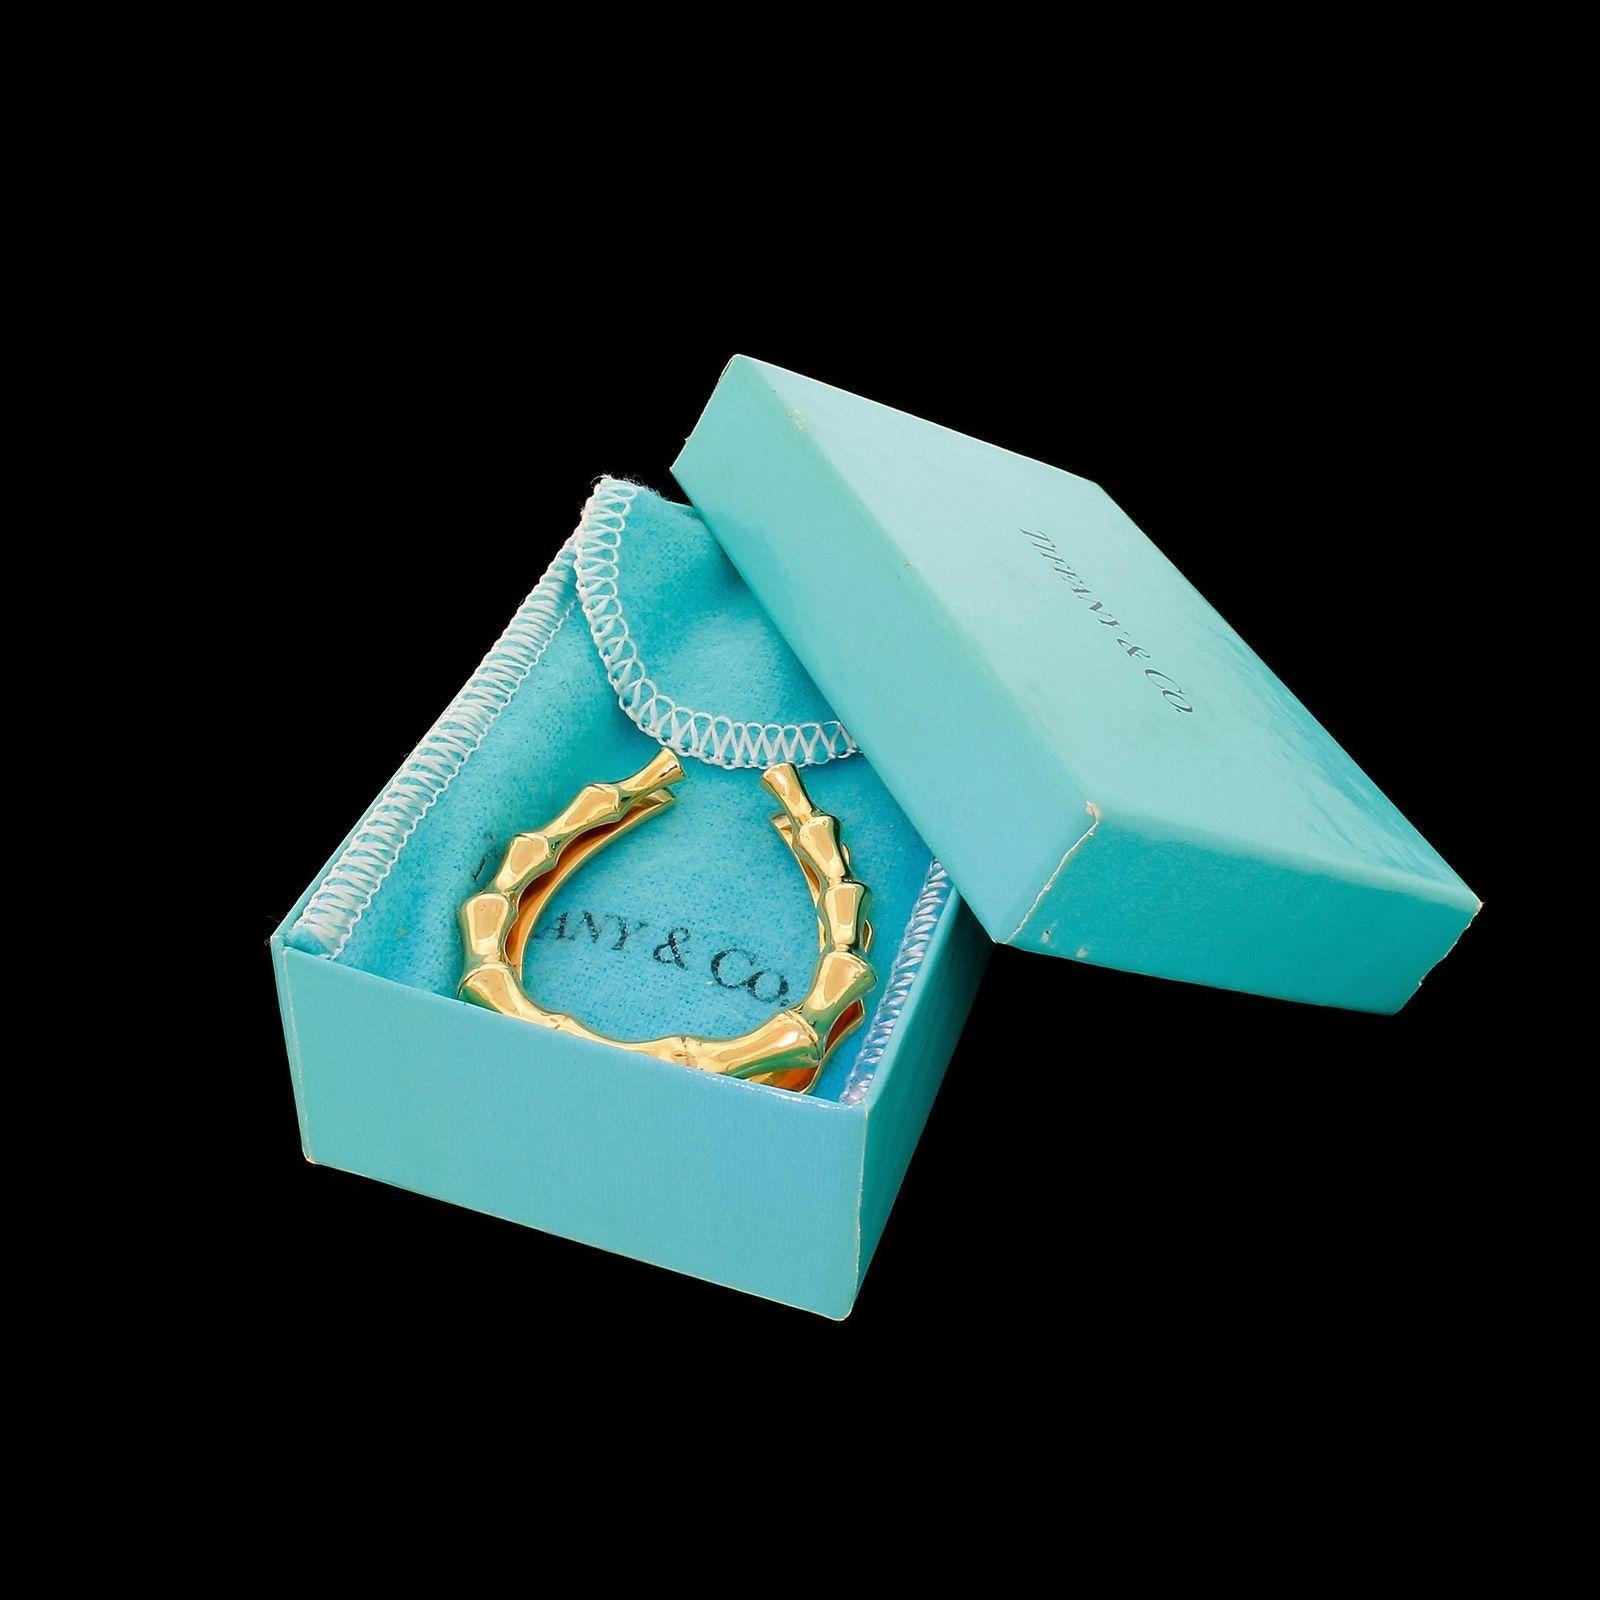 Rare Horseshoe variation from the Tiffany & Co Bamboo line, this particular design seldomly seen and very rarely comes up for sale.
This piece although pre-owned is in very good to excellent condition, no mongrams either applied removed and when you